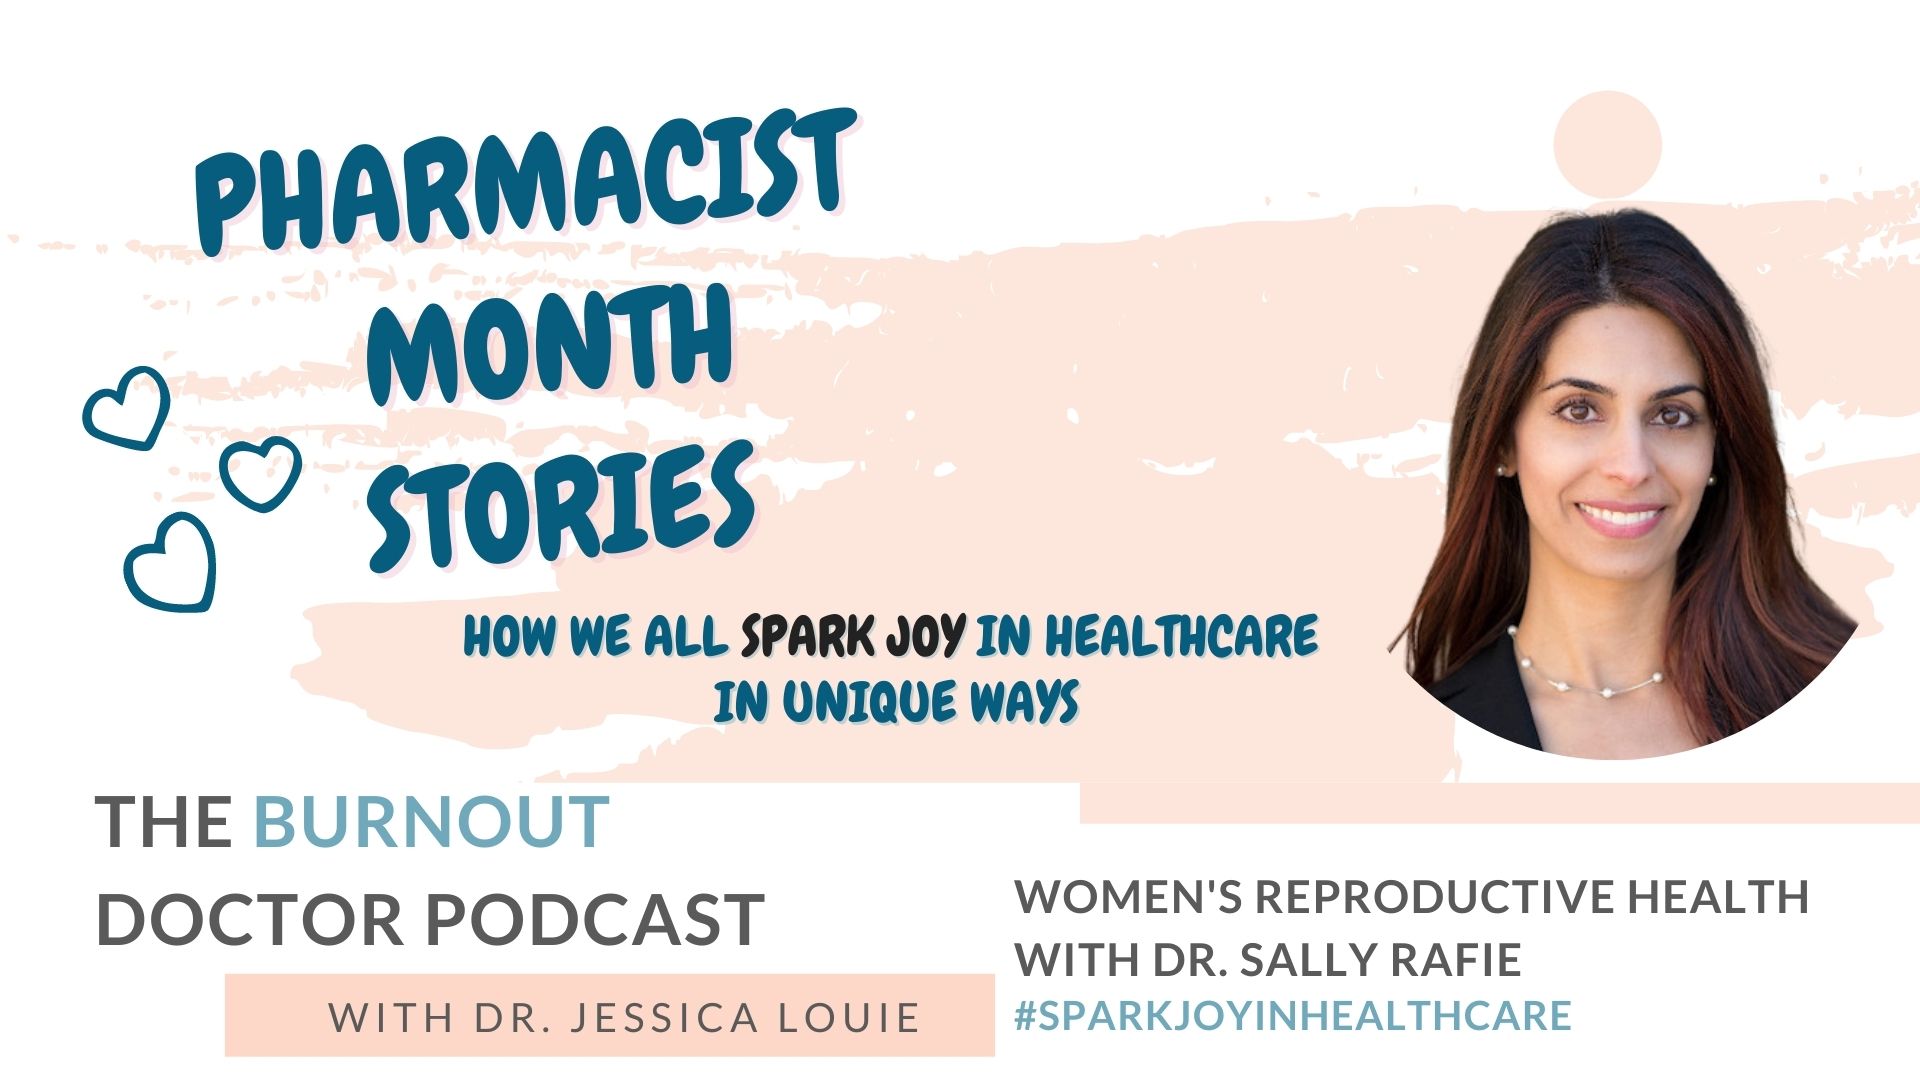 Dr. Sally Rafie on The Burnout Doctor Podcast with Dr. Jessica Louie. Pharmacist burnout stories. Pharmacist Month Stories. The Birth Control Pharmacist. Female reproductive health. Simplifying healthcare families. KonMari and Healthcare.